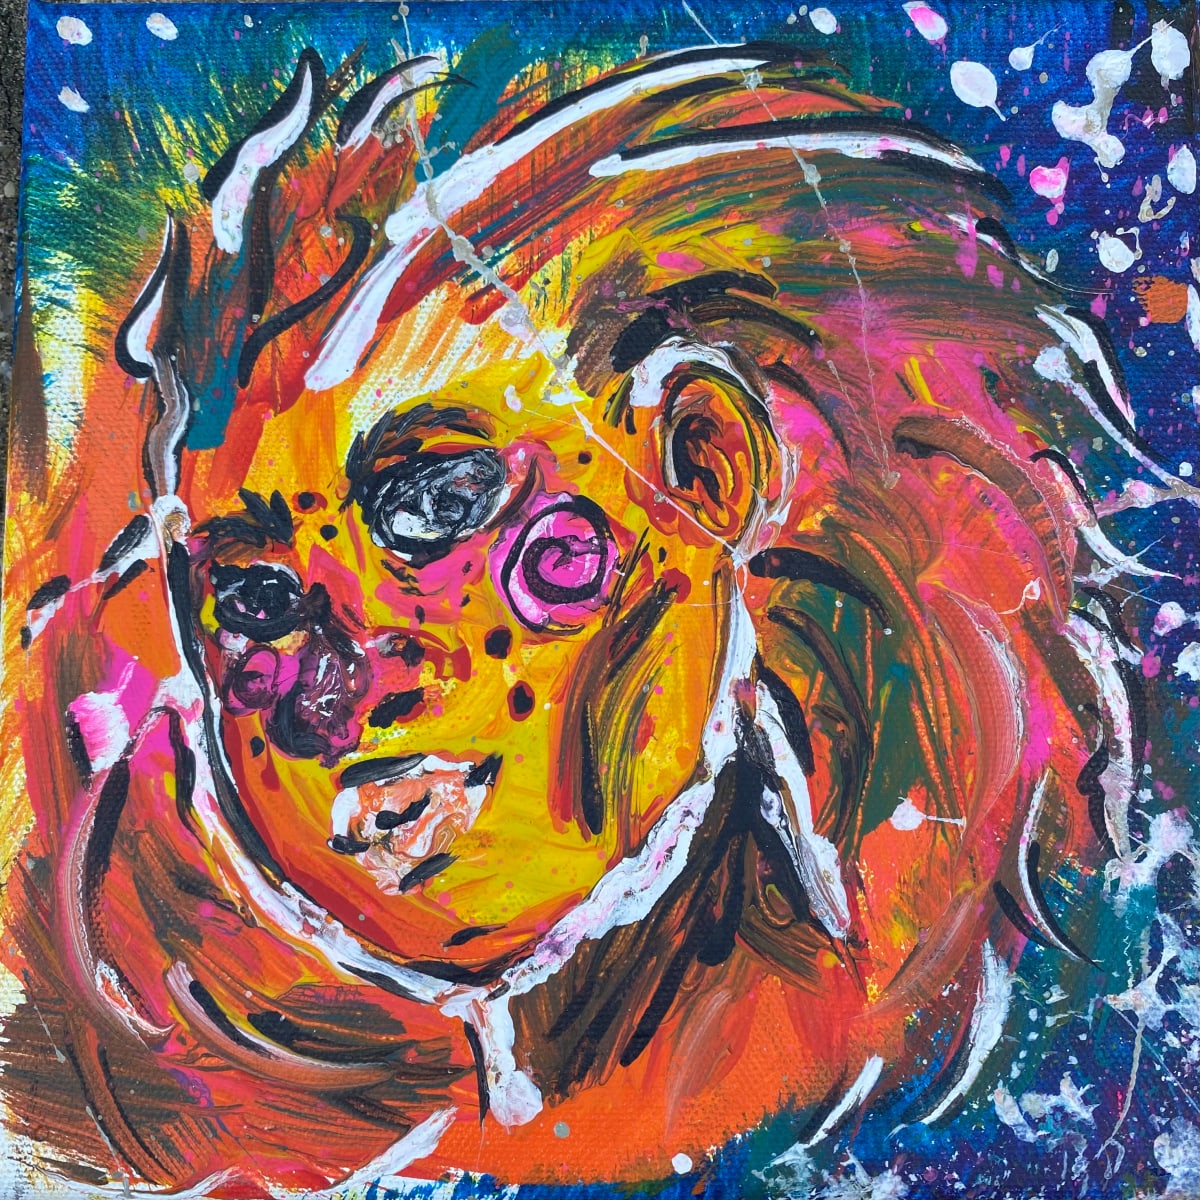 Sun Lady by Kainan Mun Dye  Image: Acrylic painting on stretched canvas.